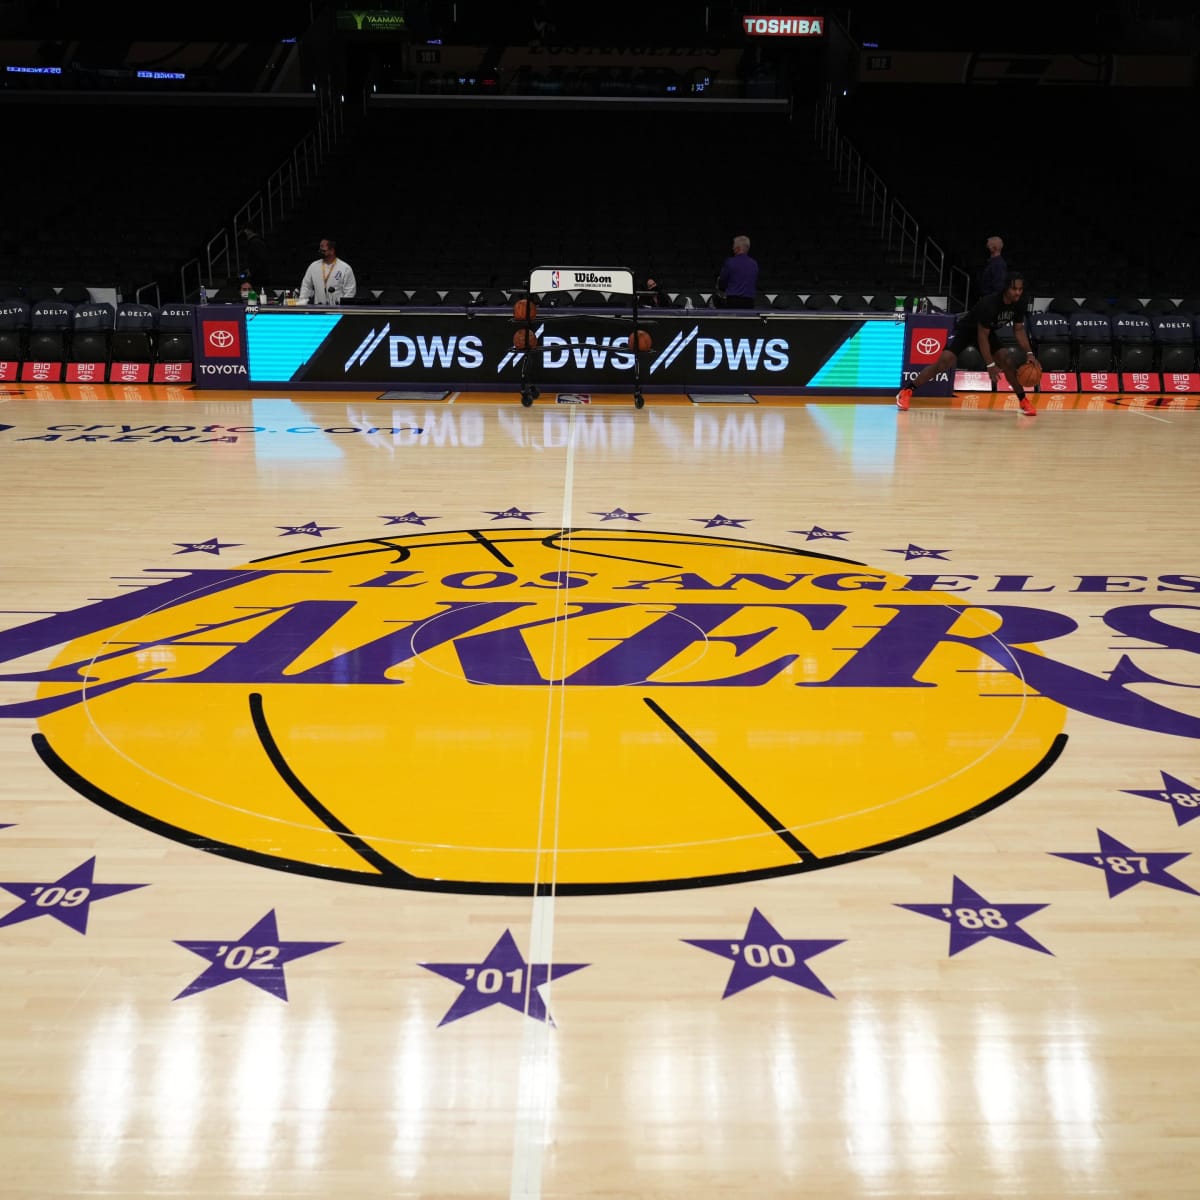 Los Angeles Lakers Nearly Achieve Perfection With Unveiling Of New Uniforms